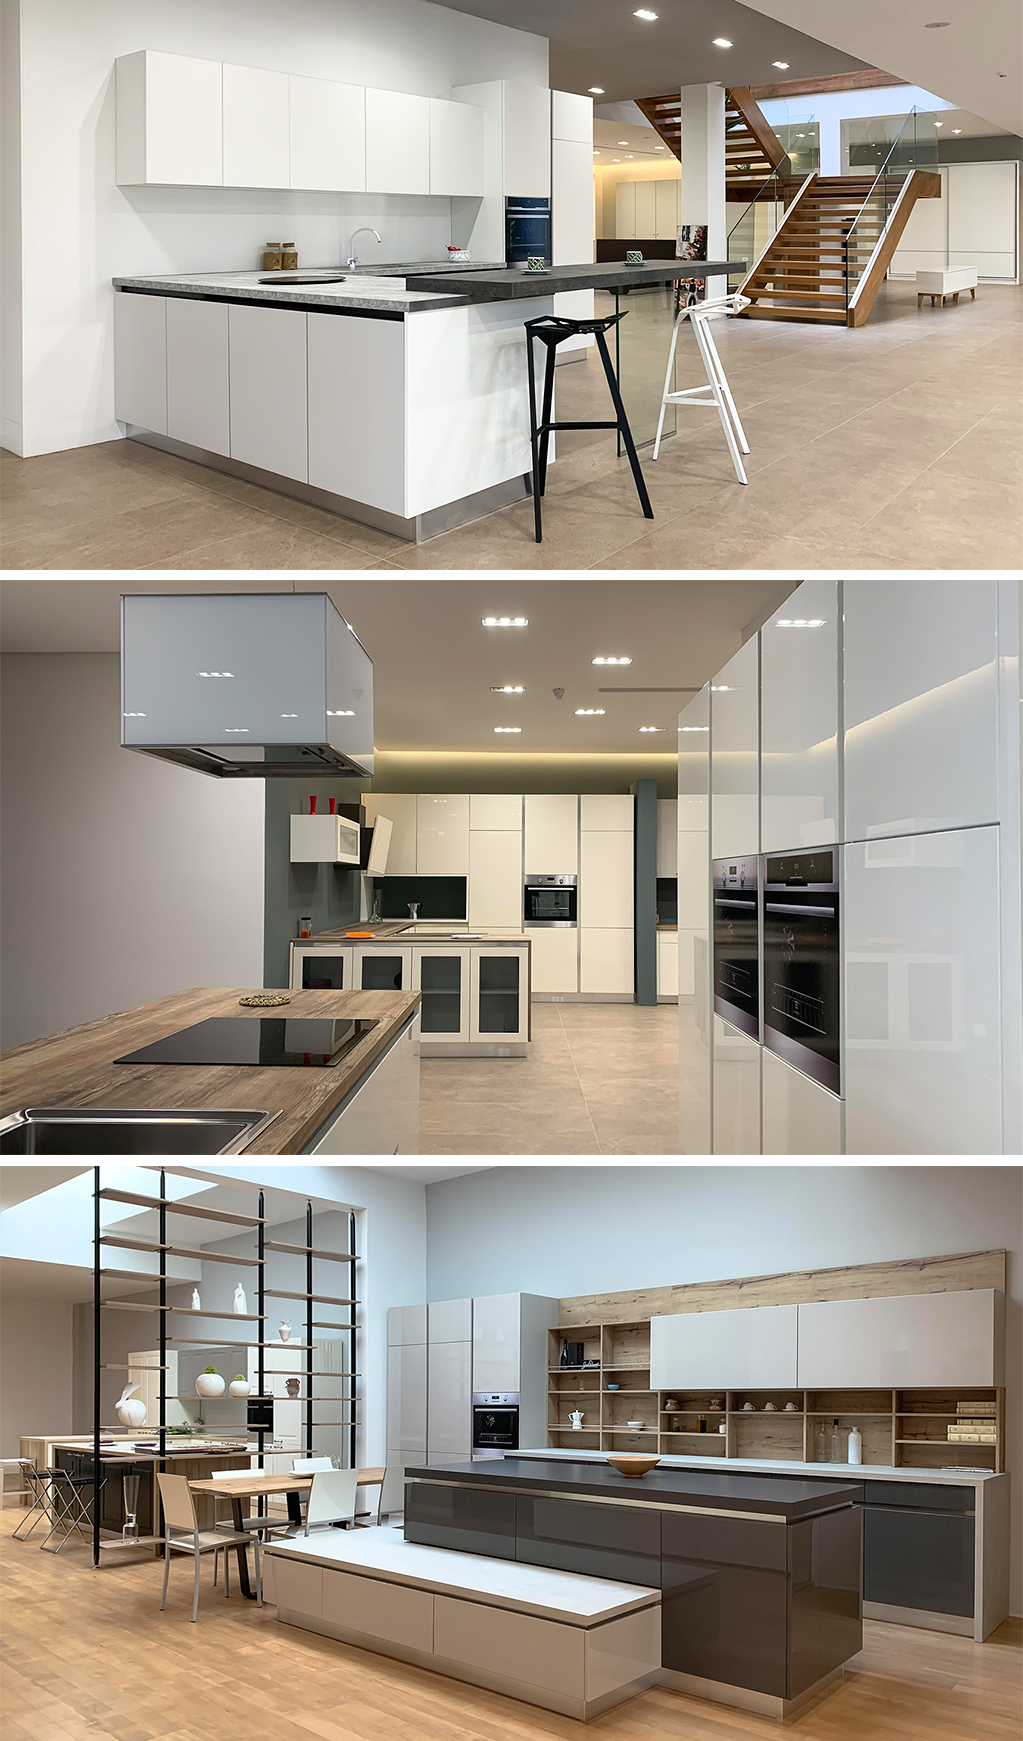 Gacaferi - Kitchens and Accessories